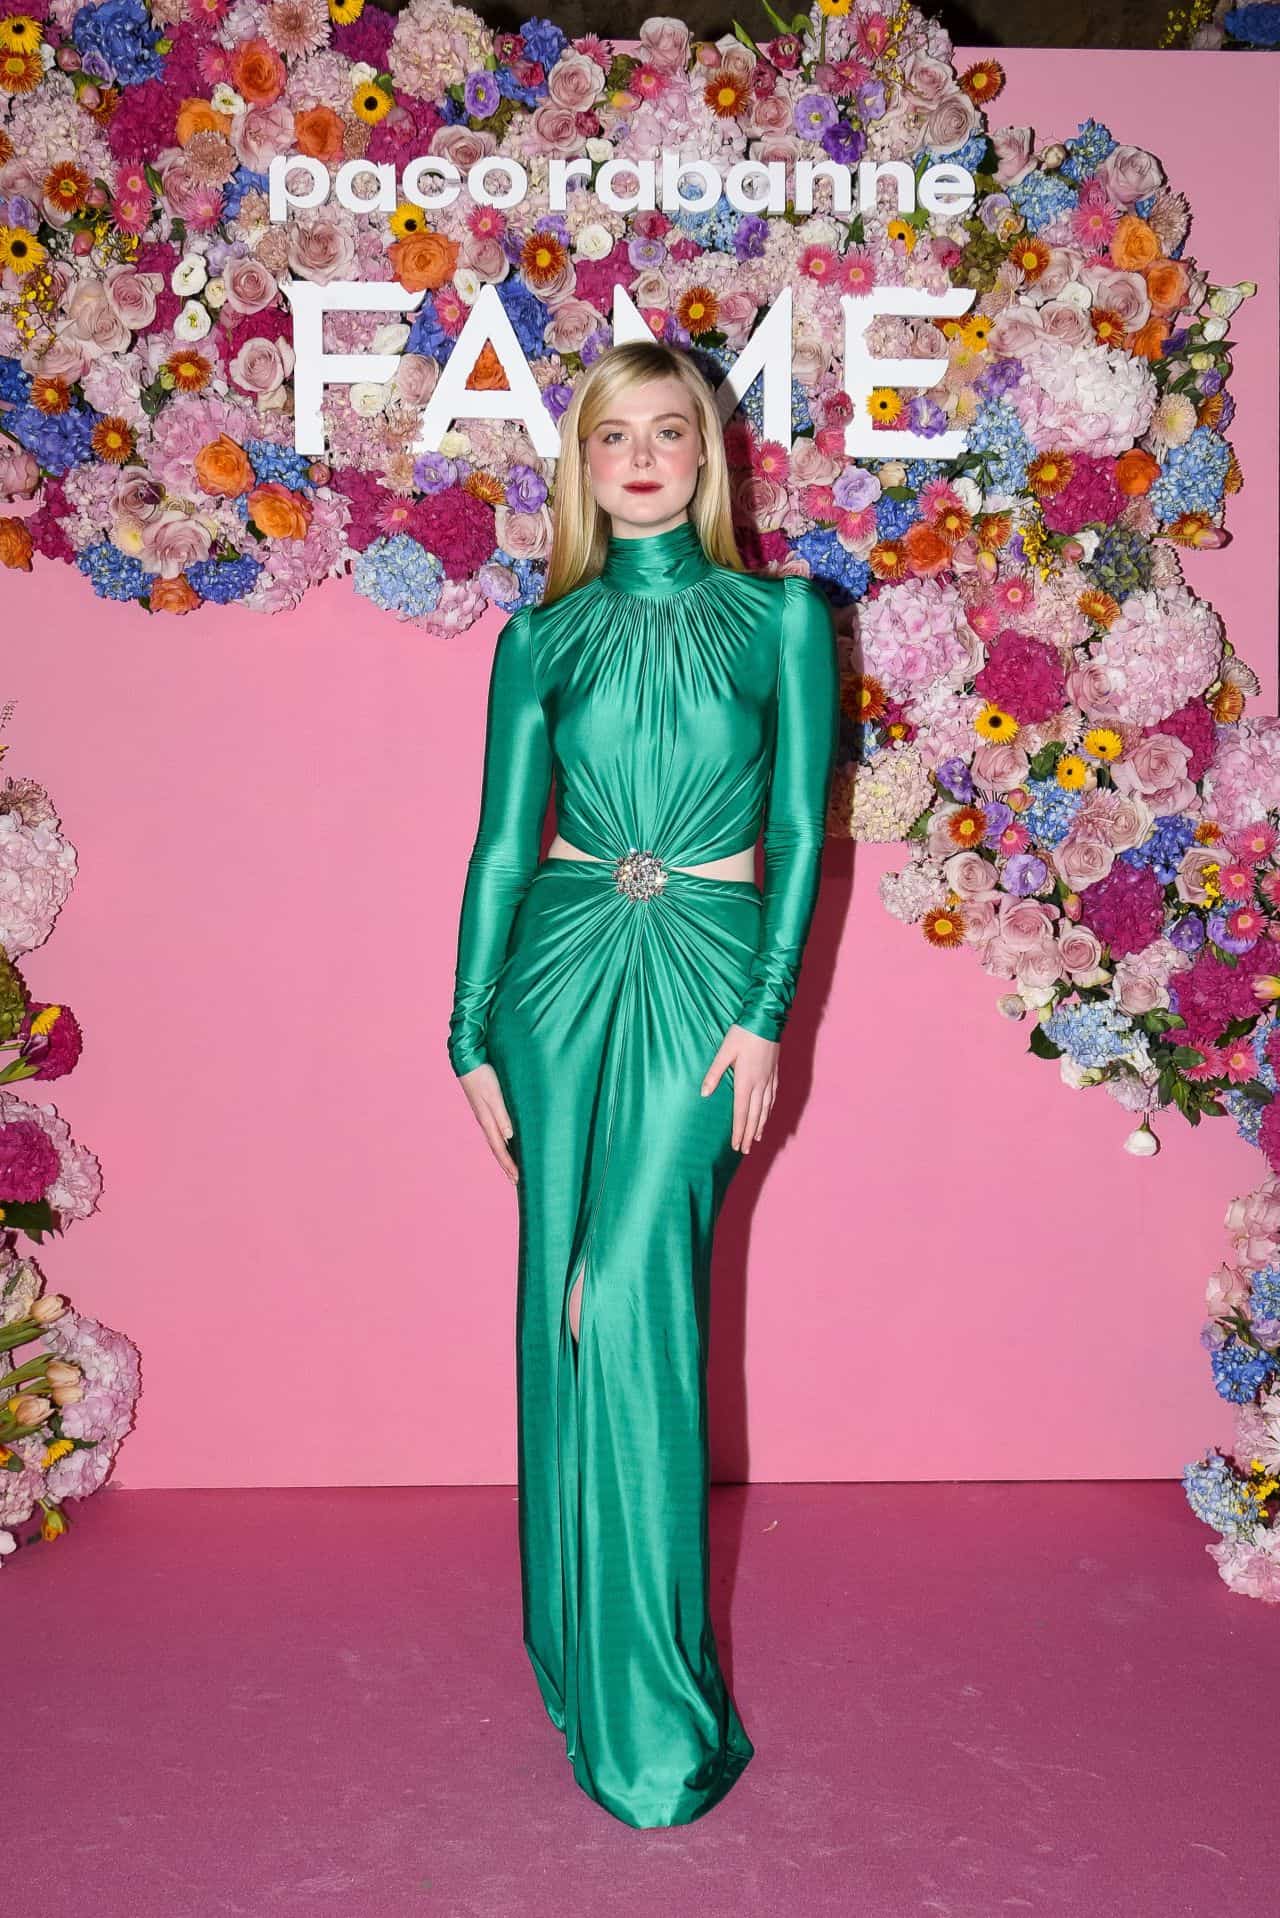 Elle Fanning Steps Out in Emerald Green Dress at Paco Rabanne "FAME" Event